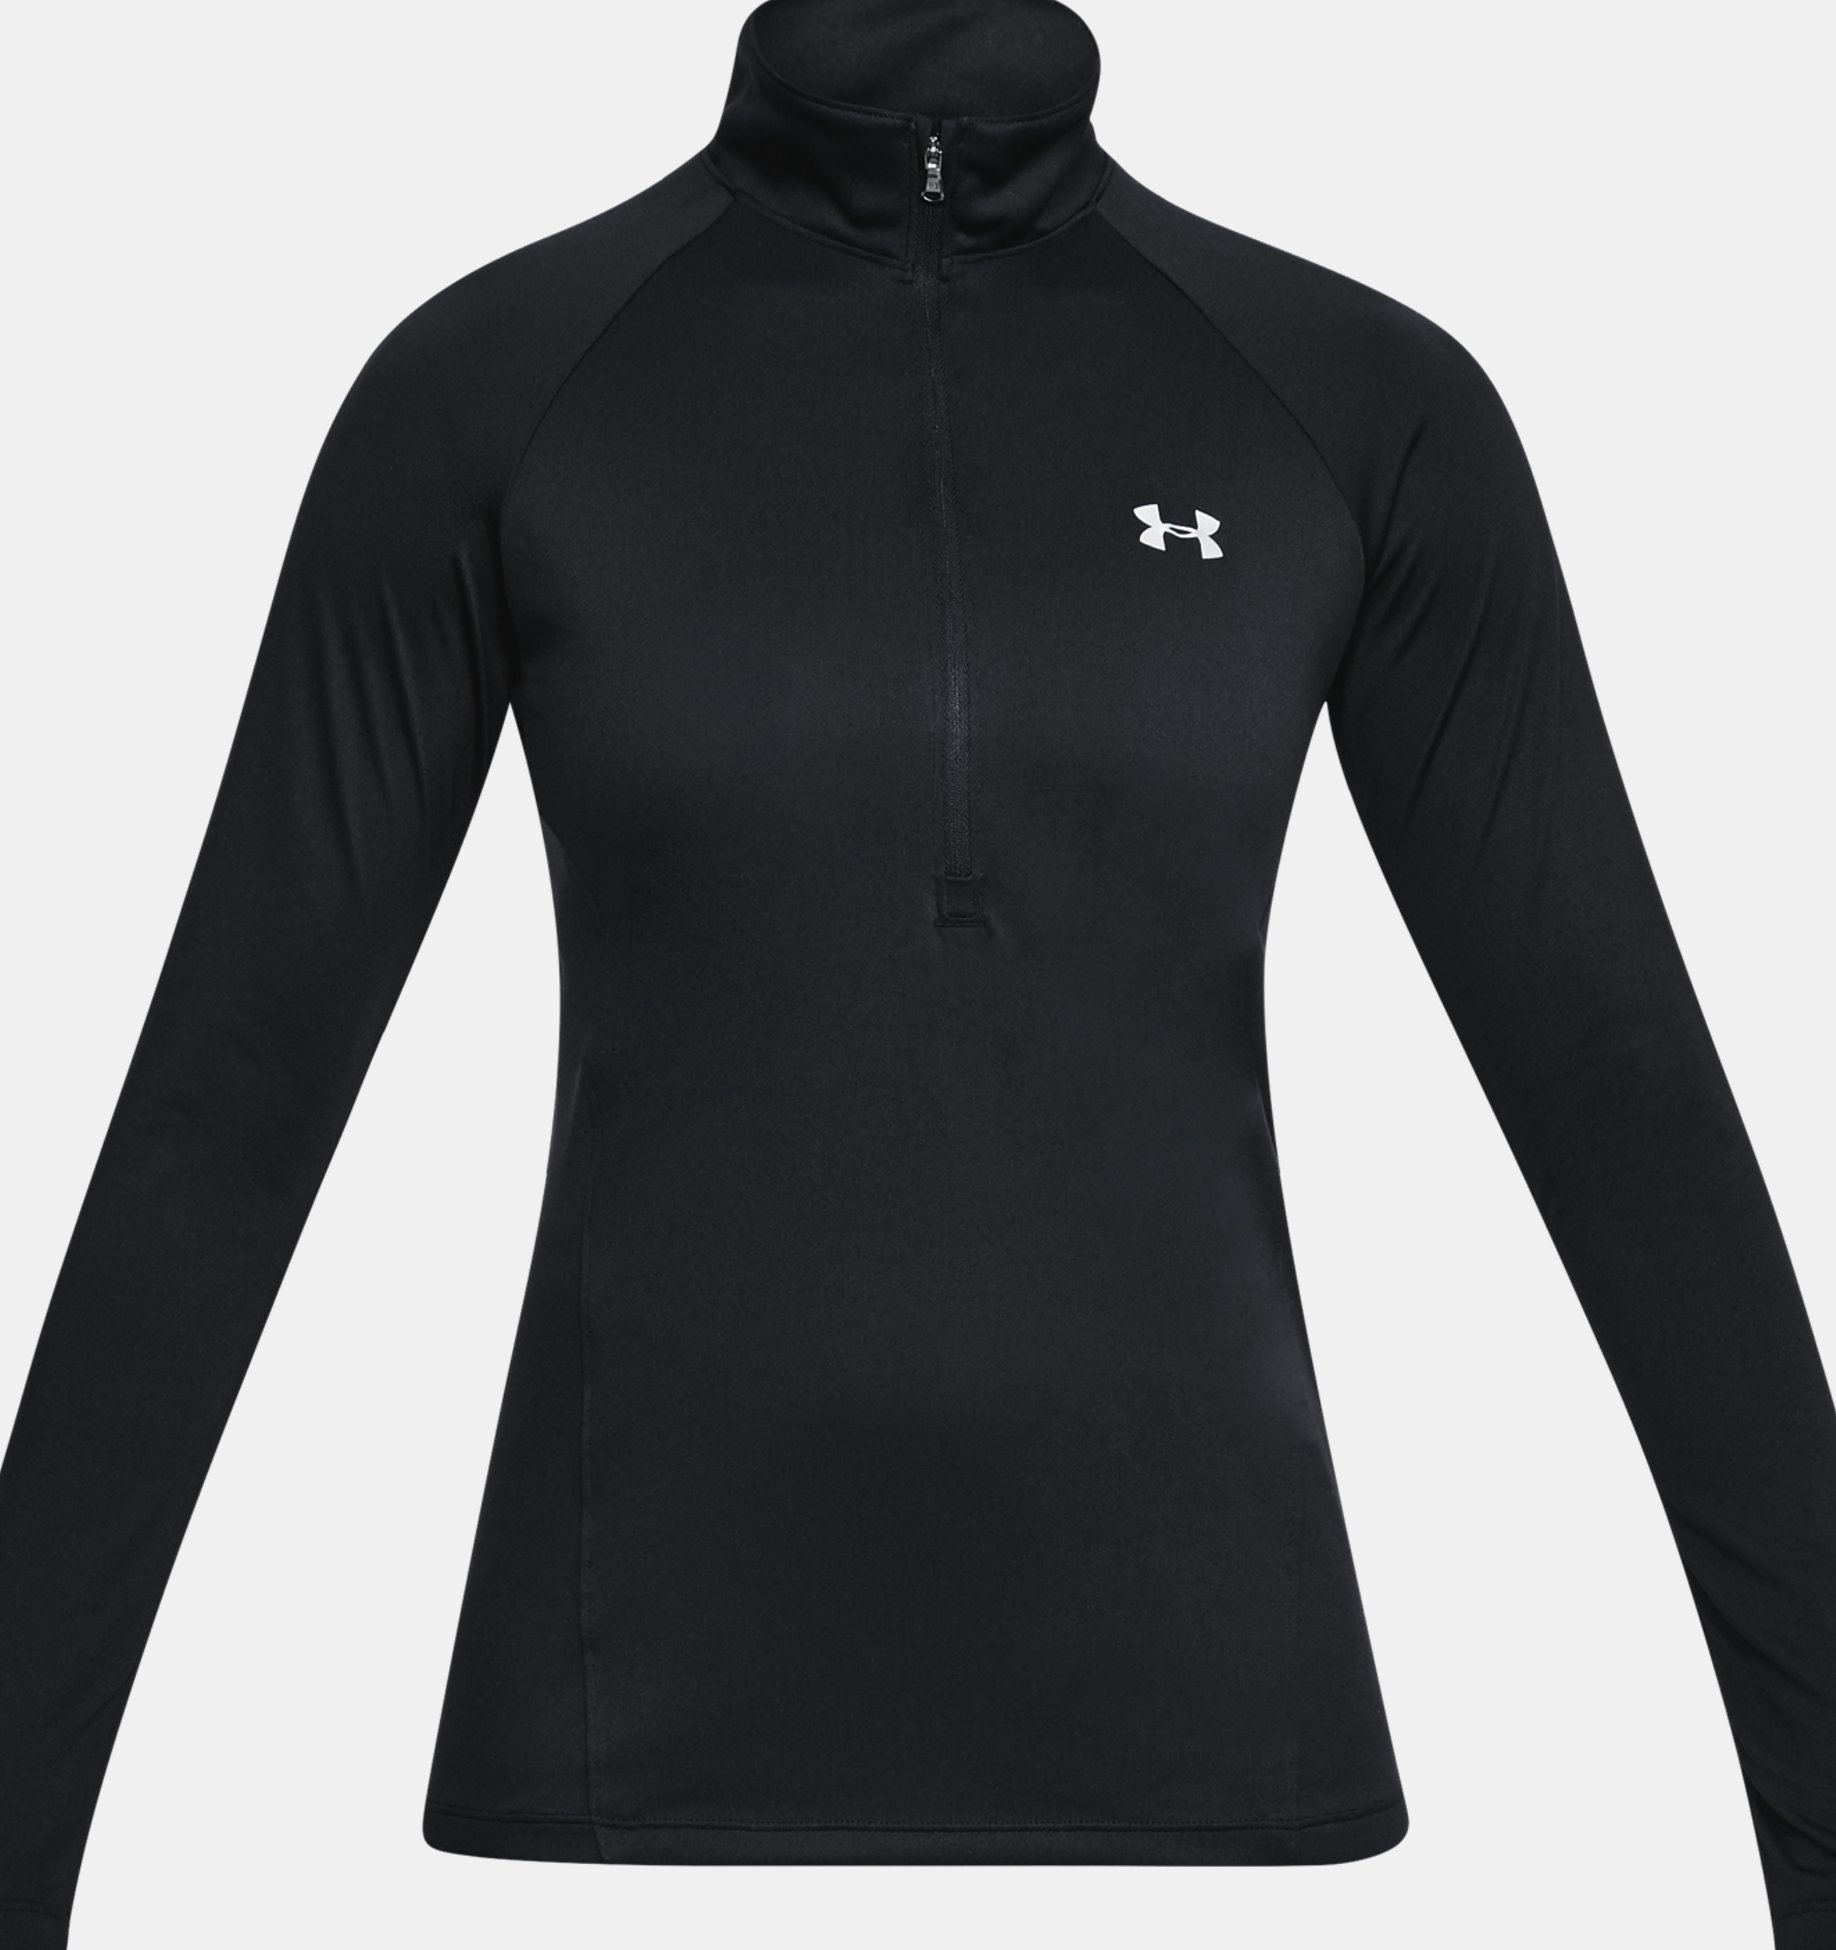 Under Armour Women's Faded Tech 1/4 Zip Pullover Hunting Shirt 1300511 943 NWT 